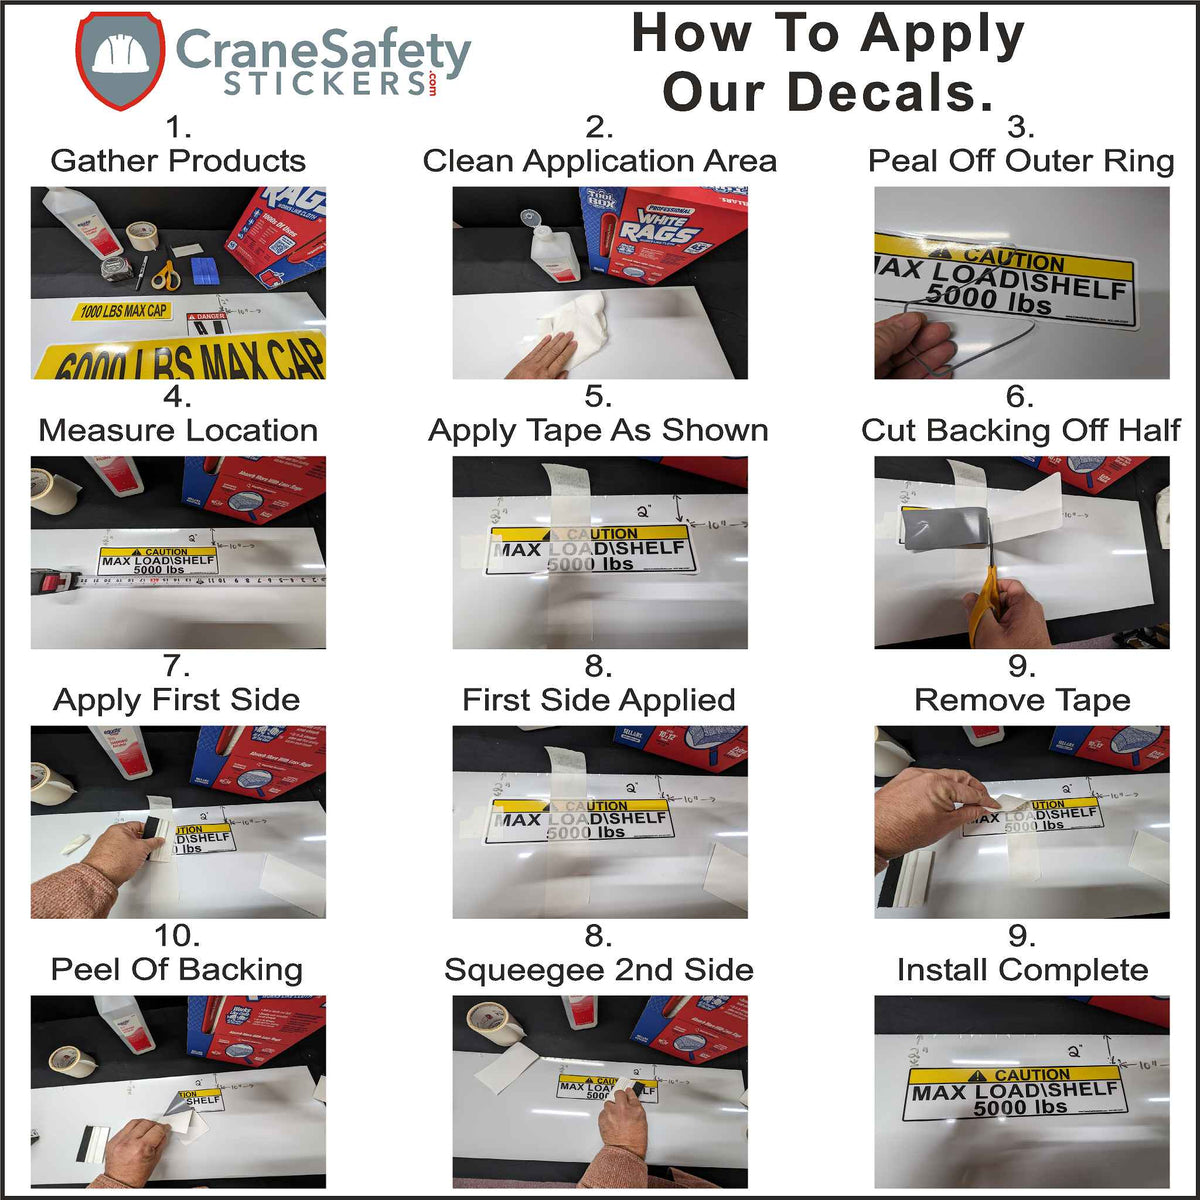 How To Apply our Crane Decal Never stand near or on tracks without operators knowledge. rotating crane and tracks can cause sever injury or death.